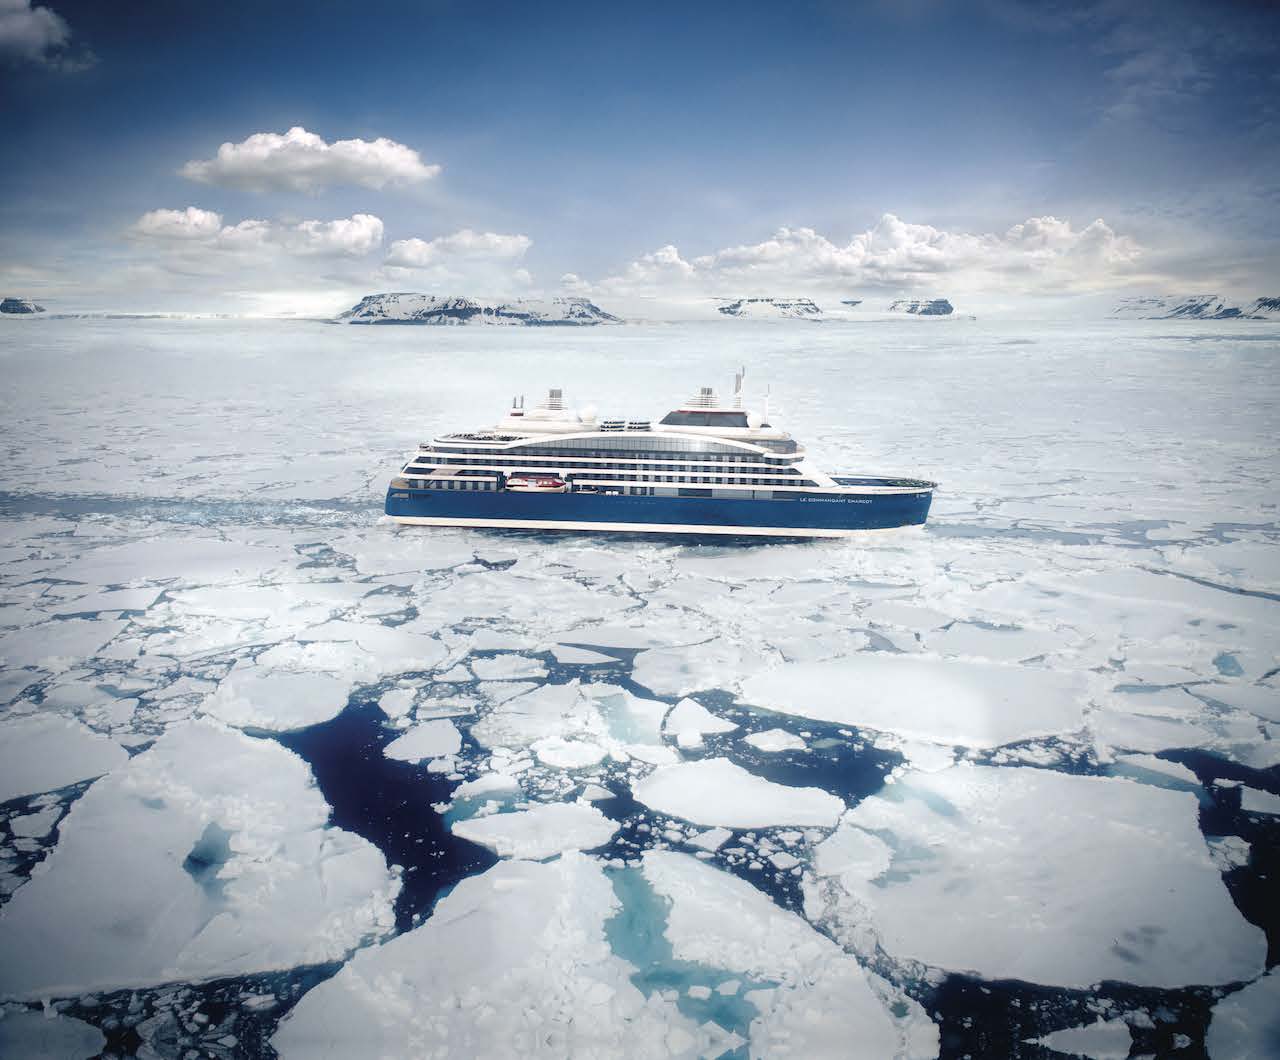 Small ship cruise line Ponant's flagship vessel Le Commandant Charcot prepares for an unforgettable northern summer Arctic cruising season. 